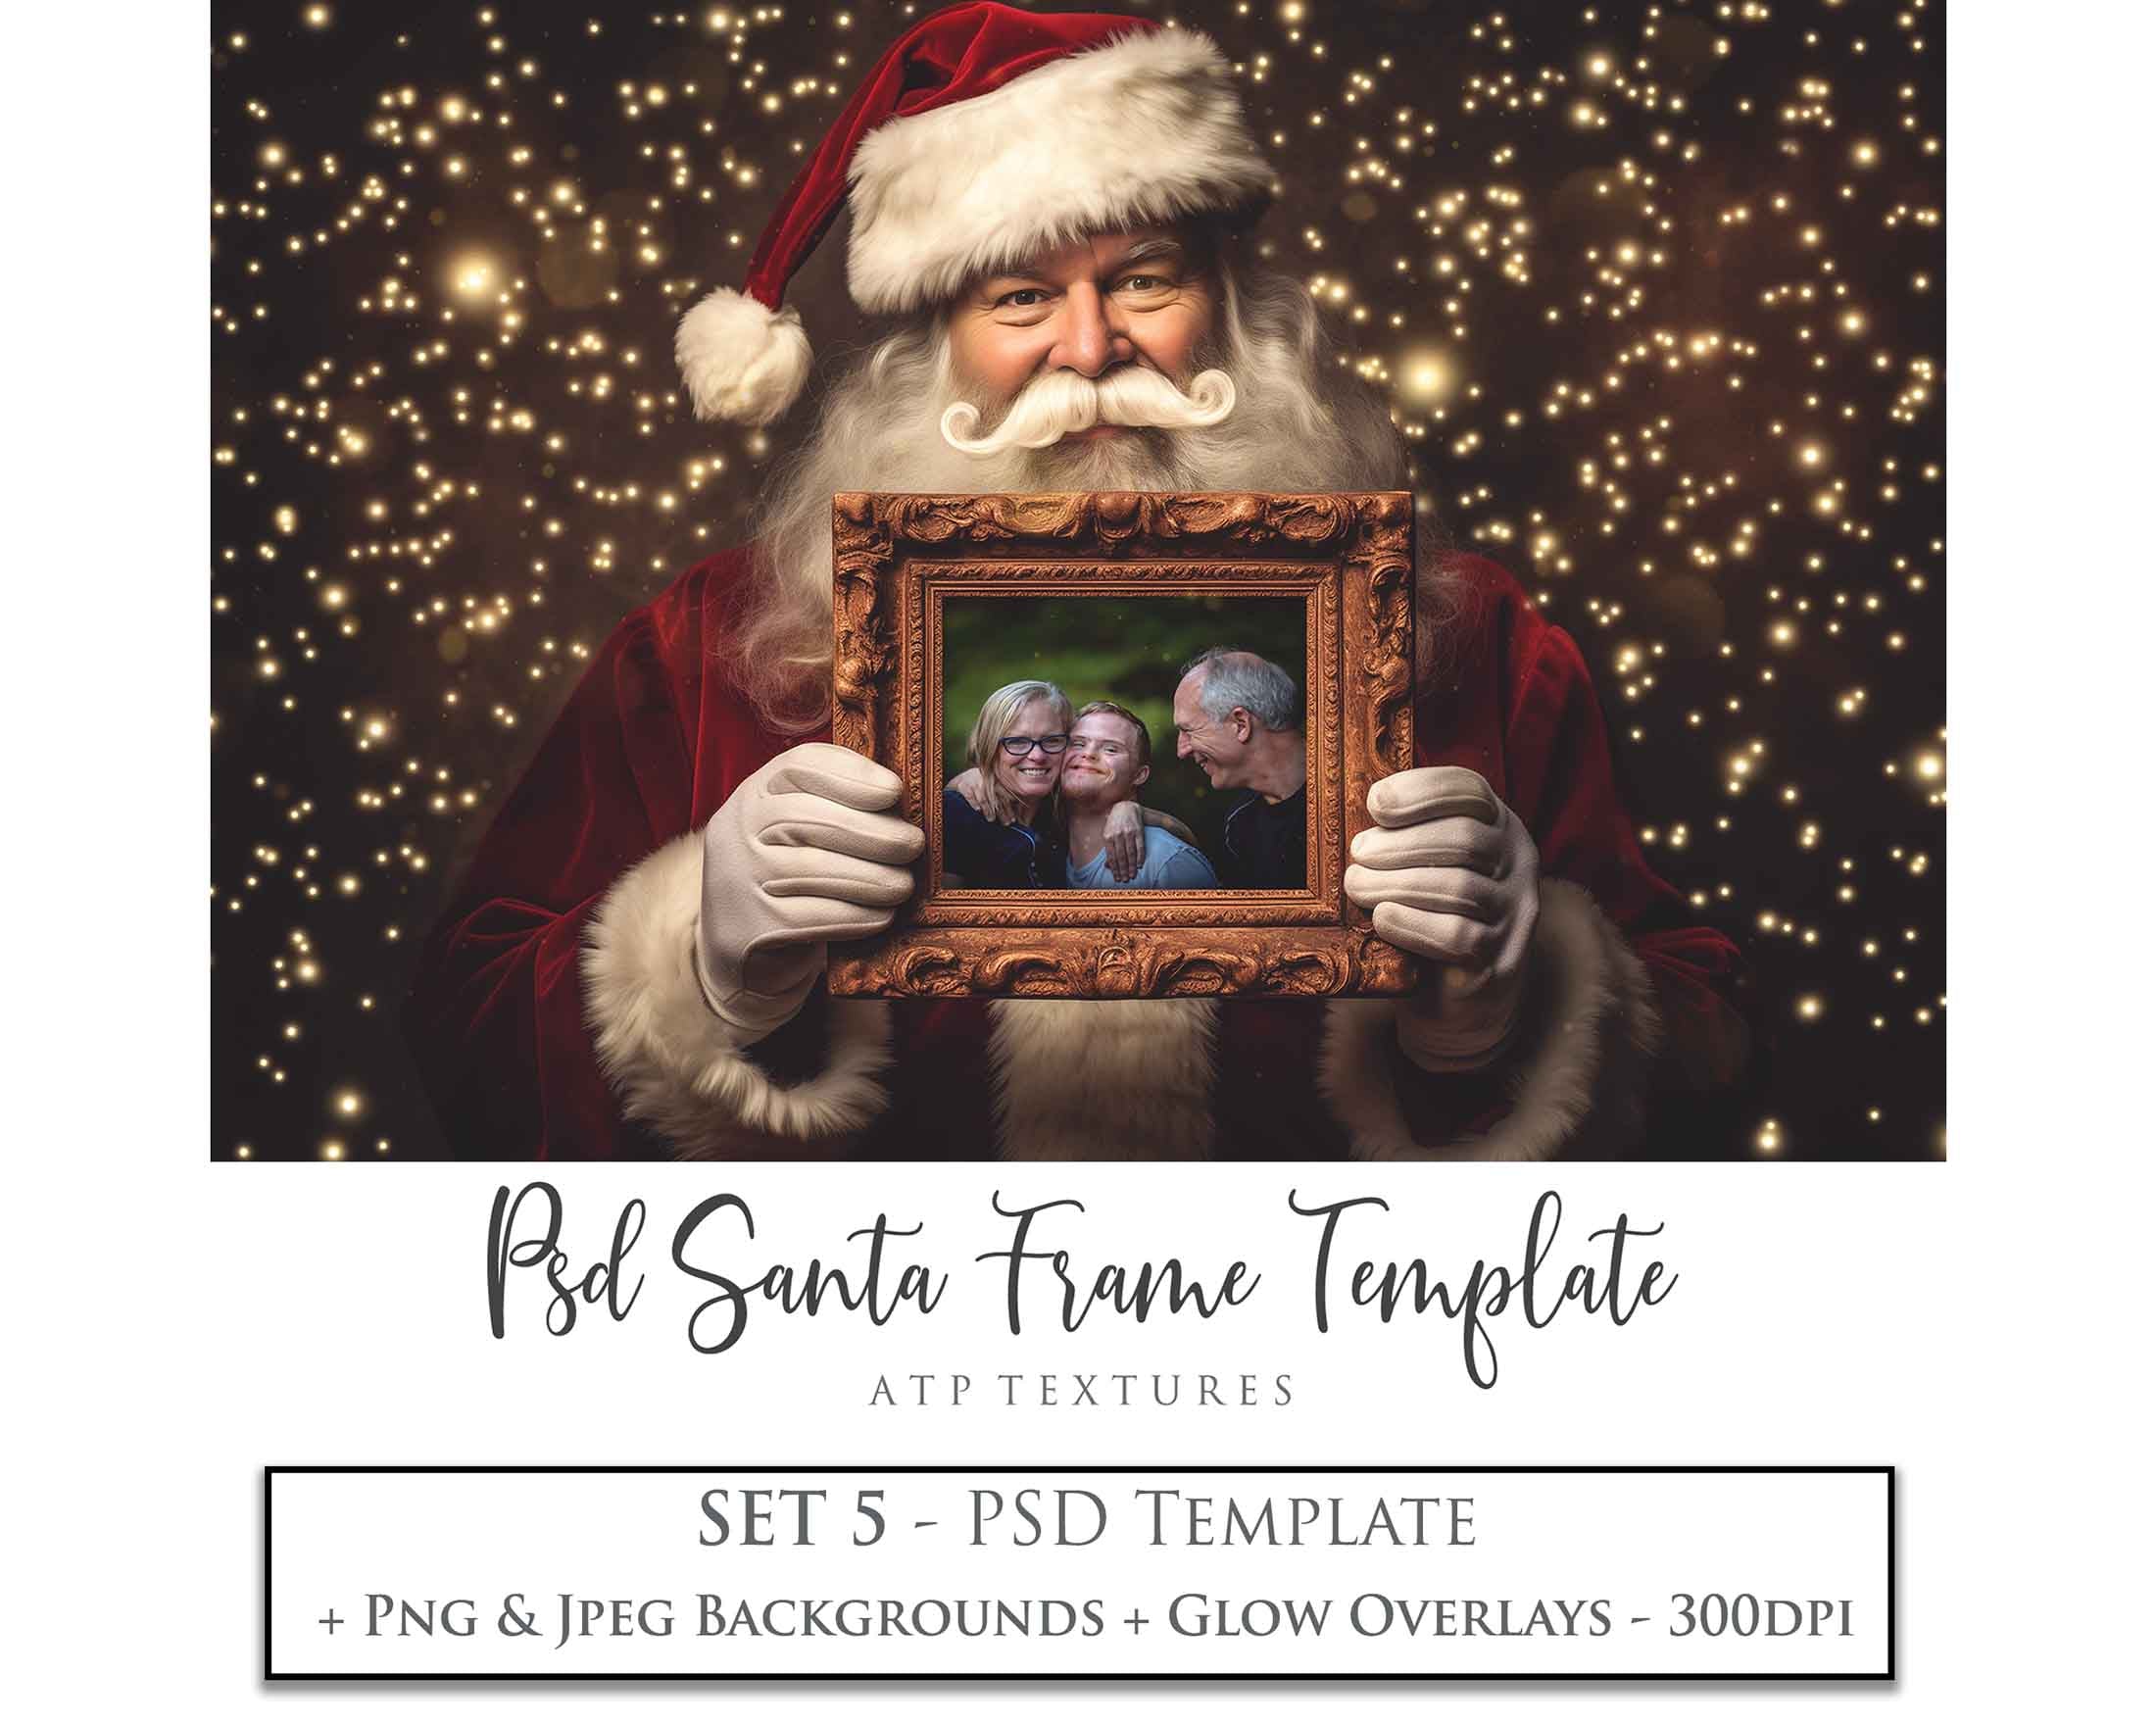 Digital Santa with Frame Background. Png snow and glow overlays & PSD Template. The frame is transparent, perfect for adding your own images. The file is 6000 x 4000, 300dpi. Png Included. Use for Christmas edits, Photography, Card Crafts, Scrapbooking. Xmas Backdrops. Santa holding a frame.